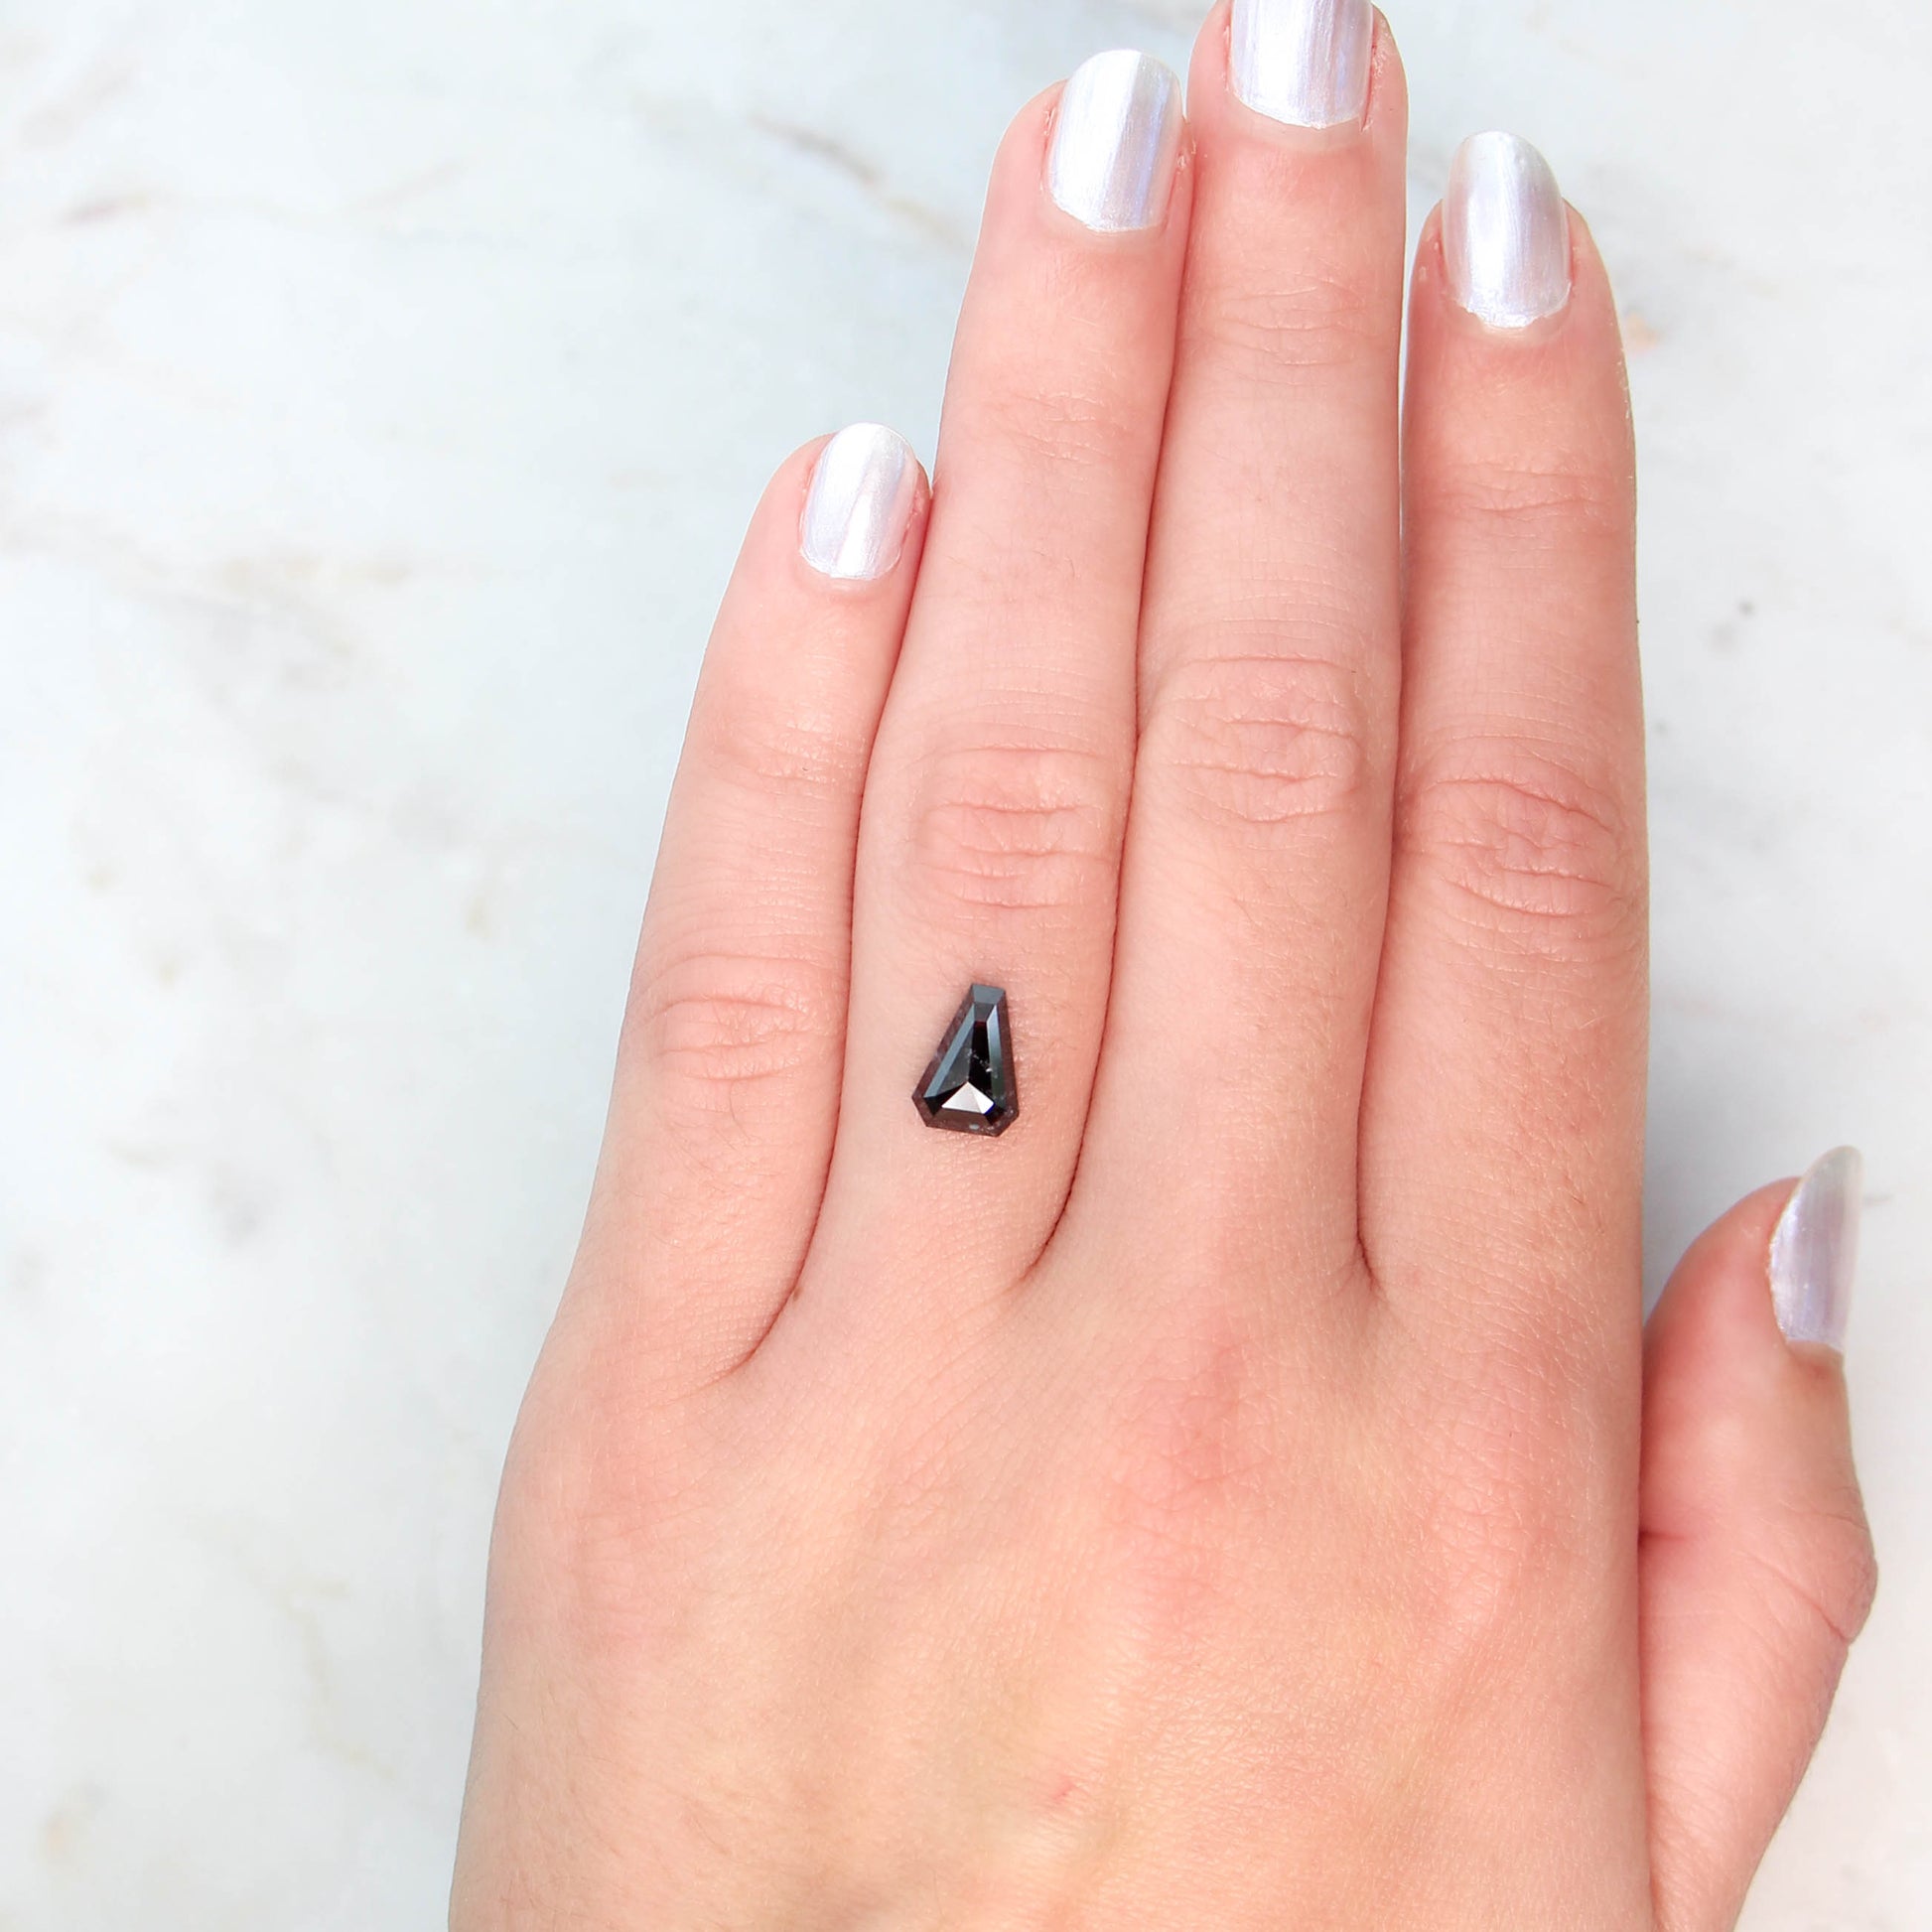 1.50 Carat Black Celestial Elongated Trapezoid Diamond for Custom Work - Inventory Code BCT150 - Midwinter Co. Alternative Bridal Rings and Modern Fine Jewelry